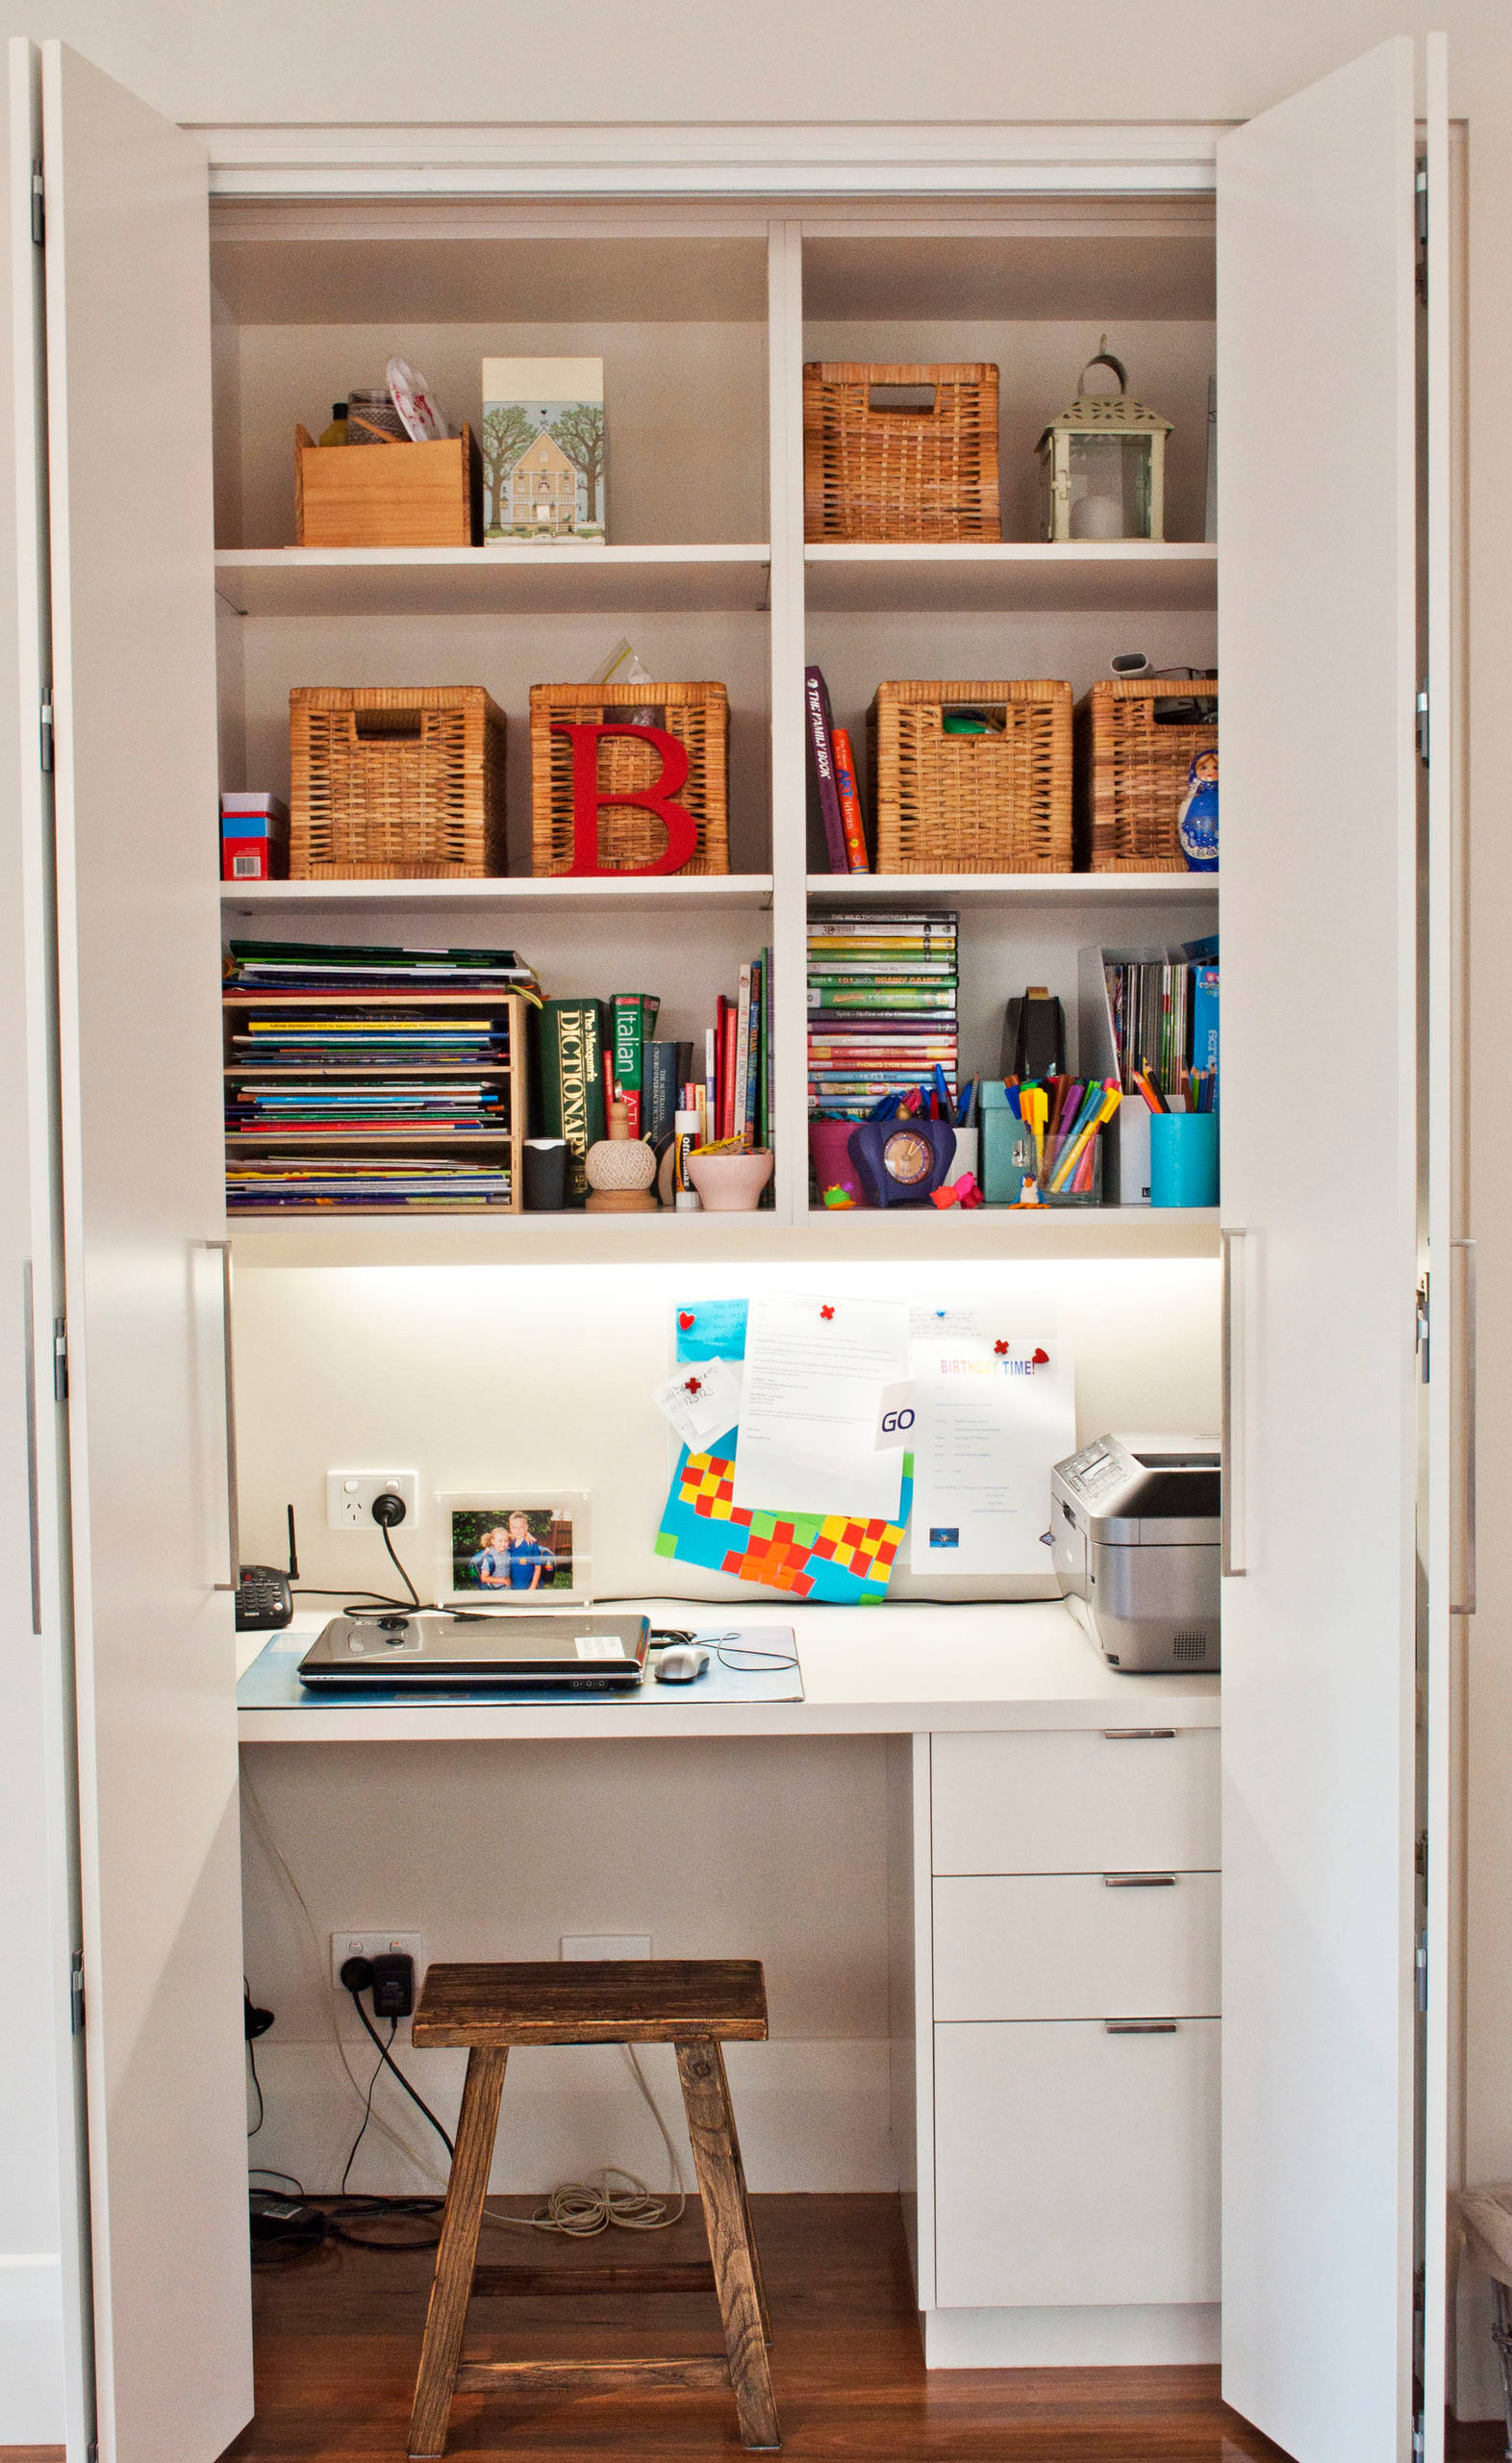 IKEA Hacks Turned a Stairwell Nook into a Hardworking Home Office